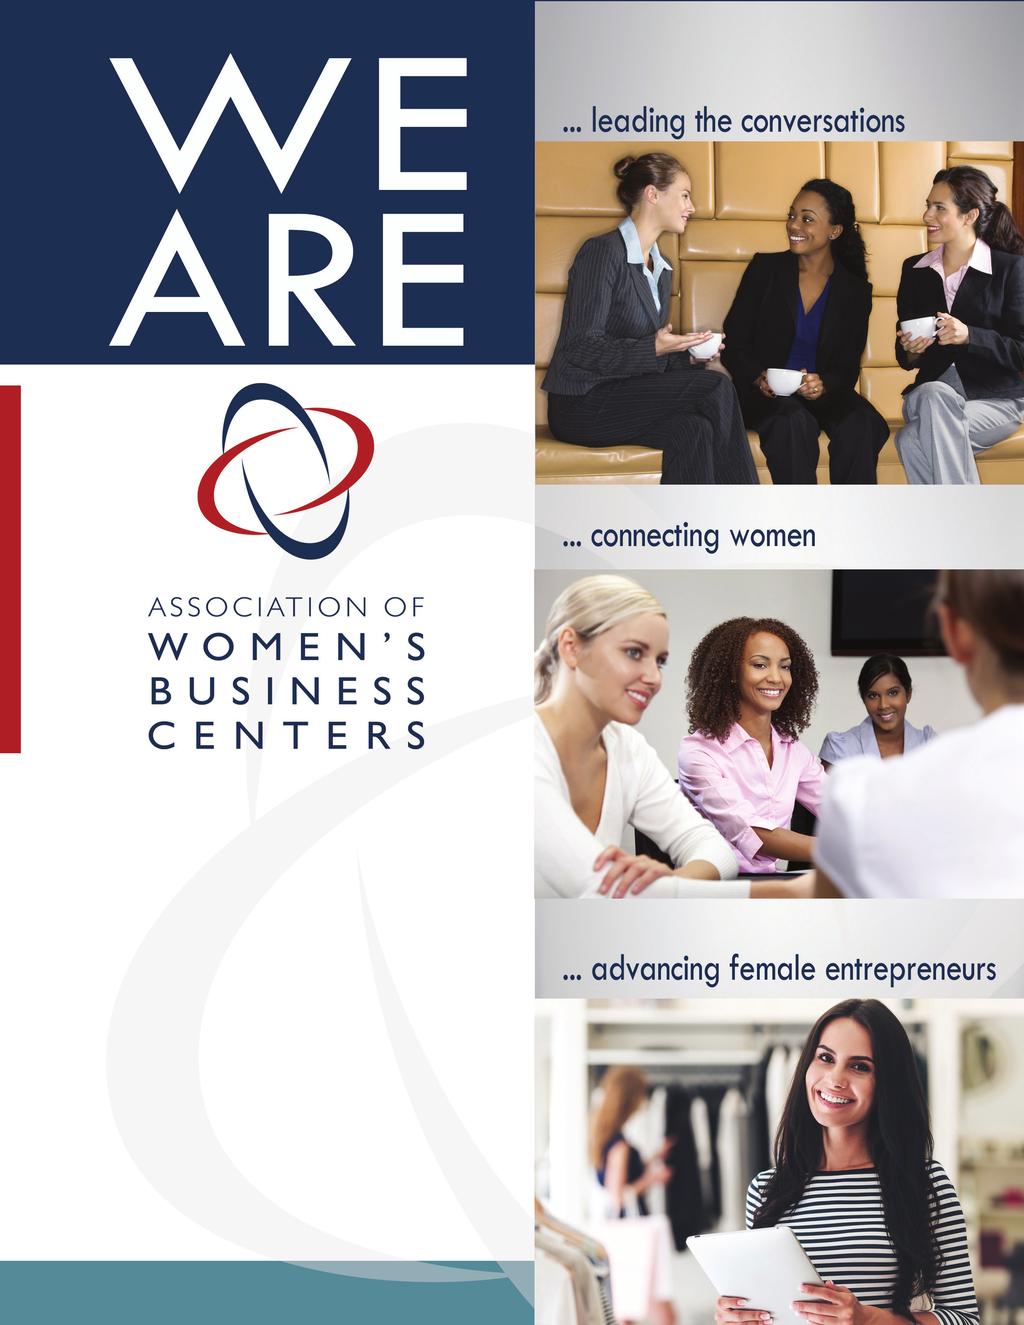 AWBC works to secure economic justice and entrepreneurial opportunities for women by supporting the national network of Women s Business Centers (WBC) operating in more